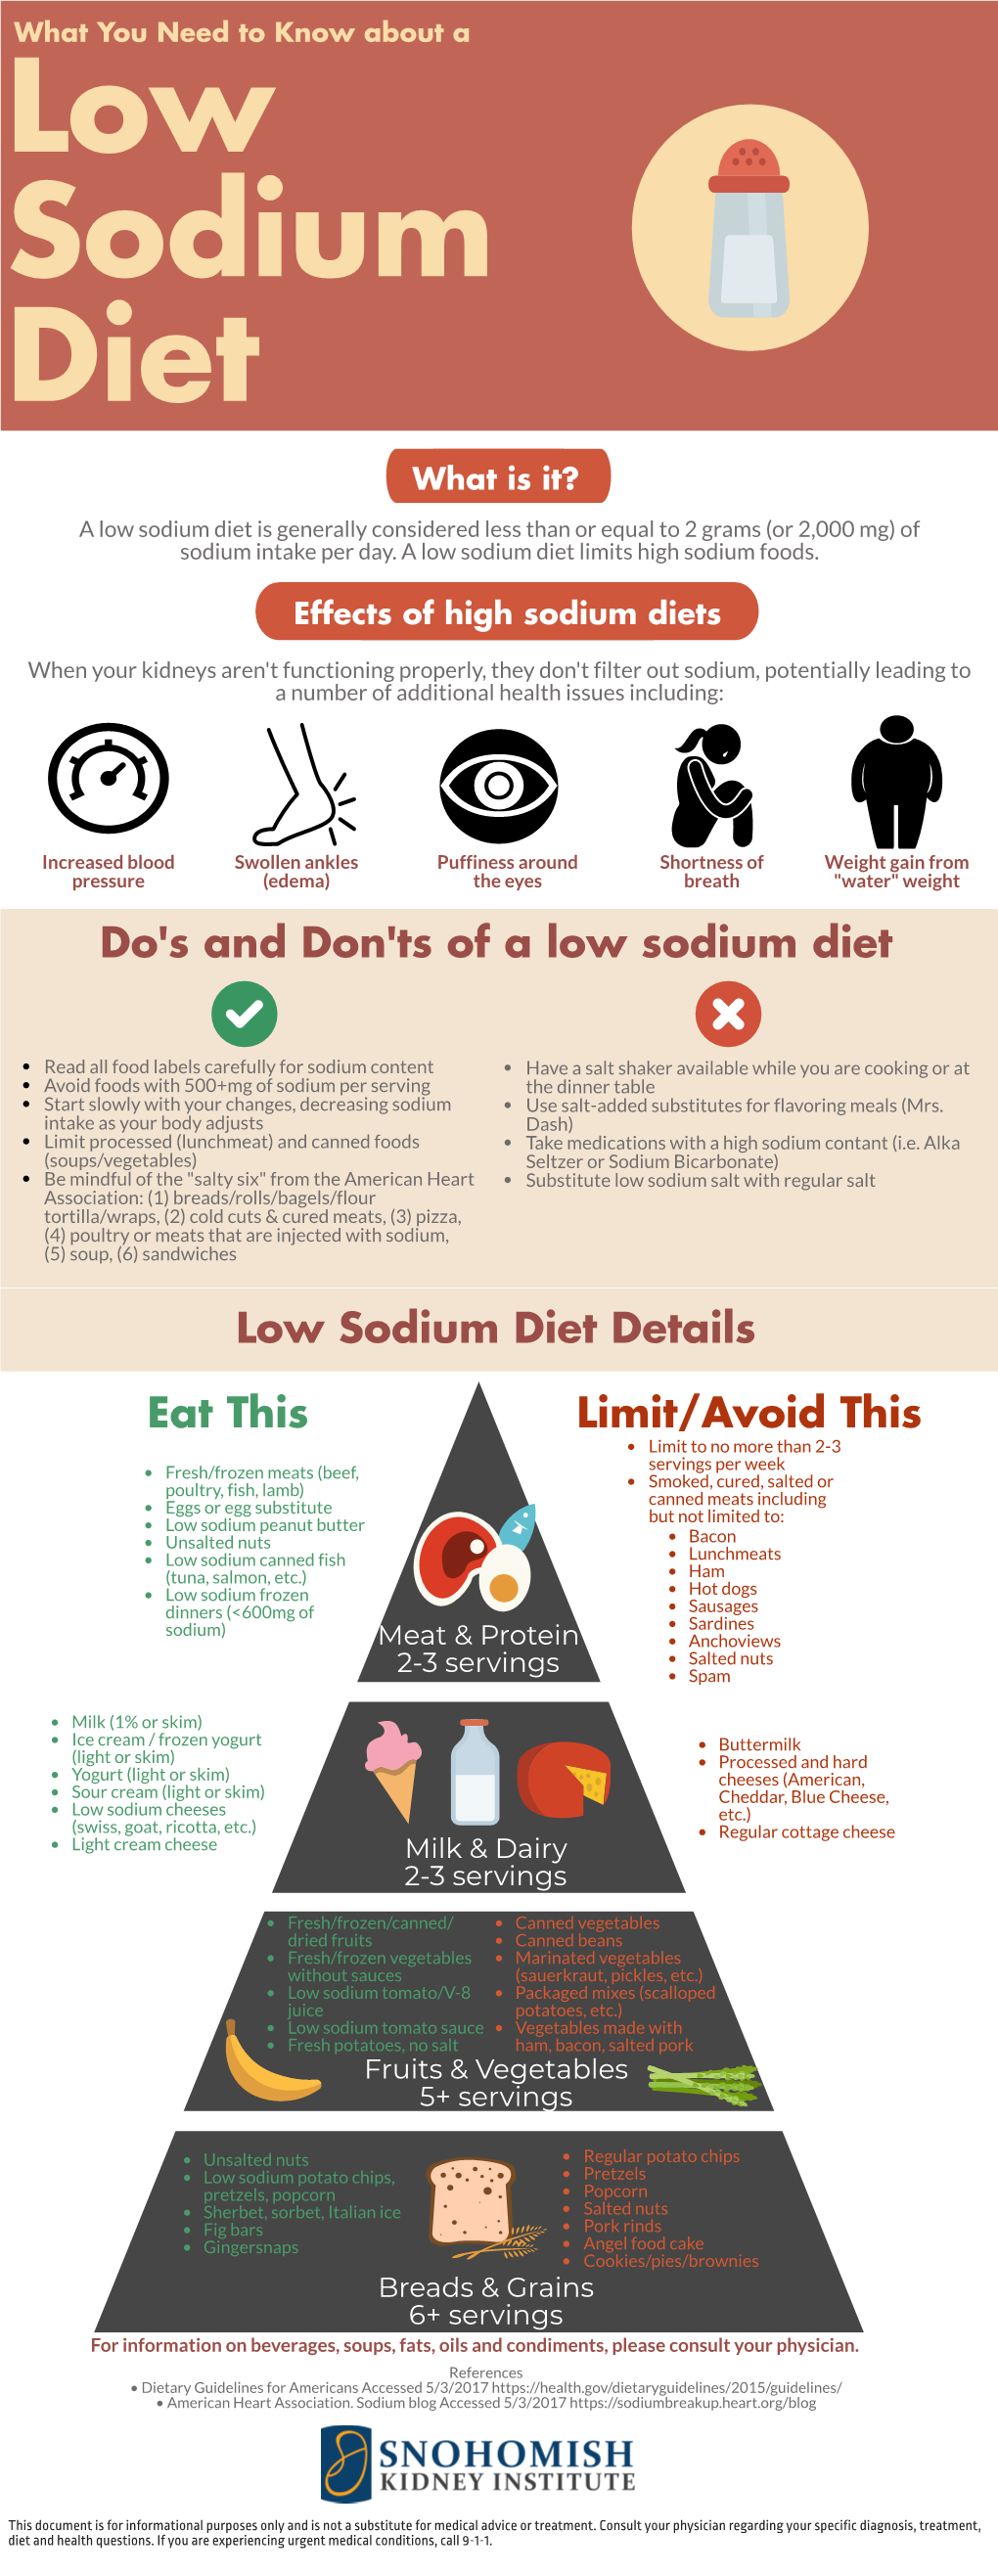 Low Sodium Diet Is Generally Considered Less Than O R Equal to 2 Grams (Or 2,000 Mg) of Sodium Intake Per Day